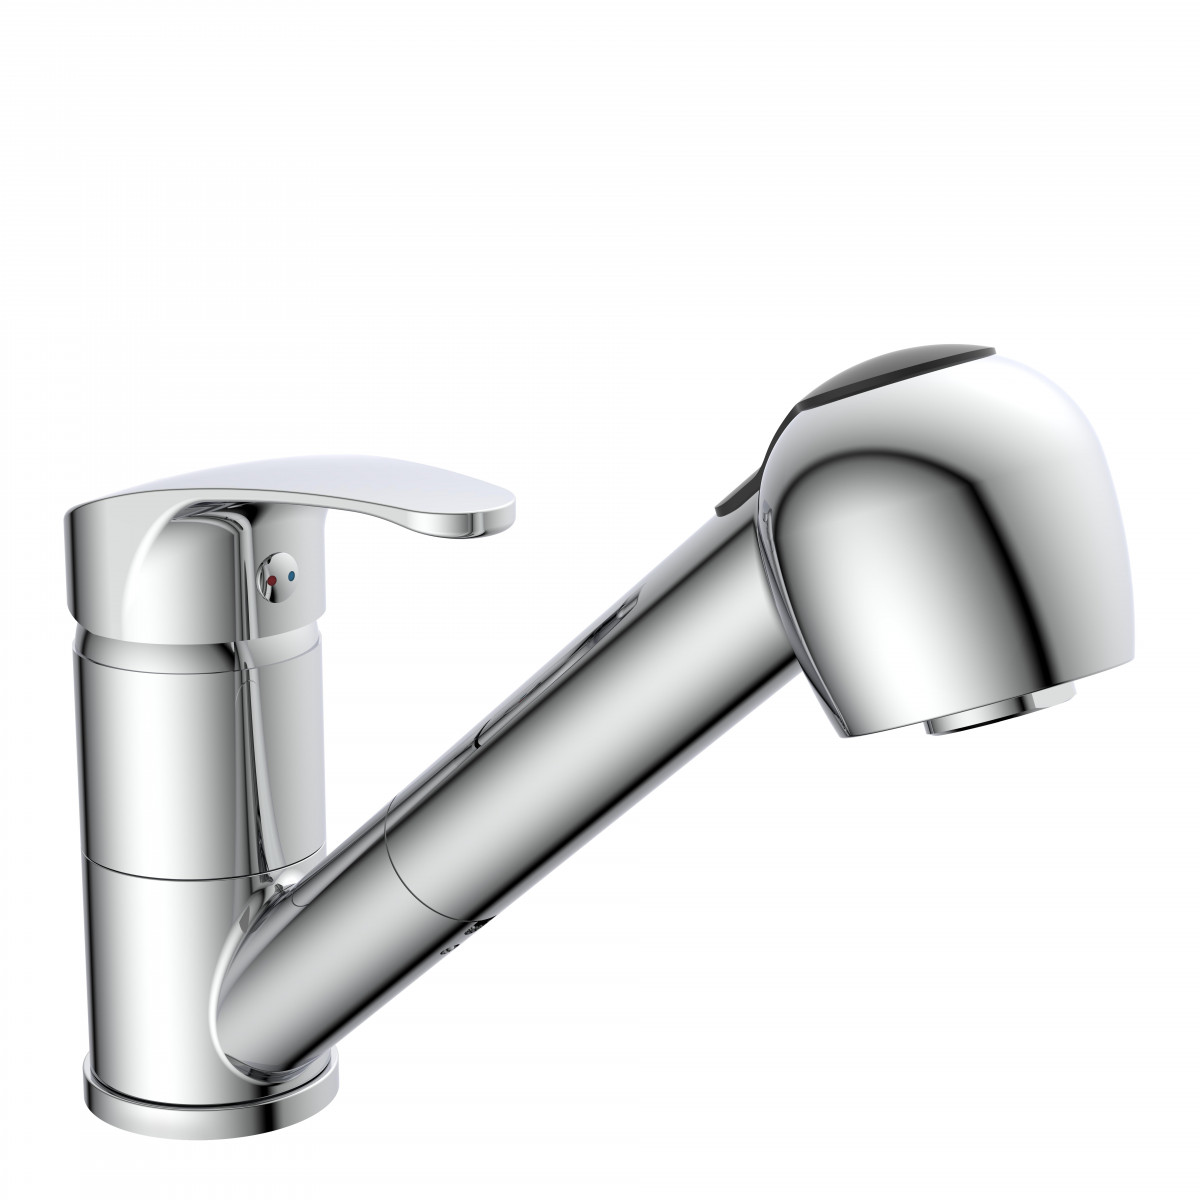 DIZIANI Sink mixer low pressure, chrome, with pull-out sprayer